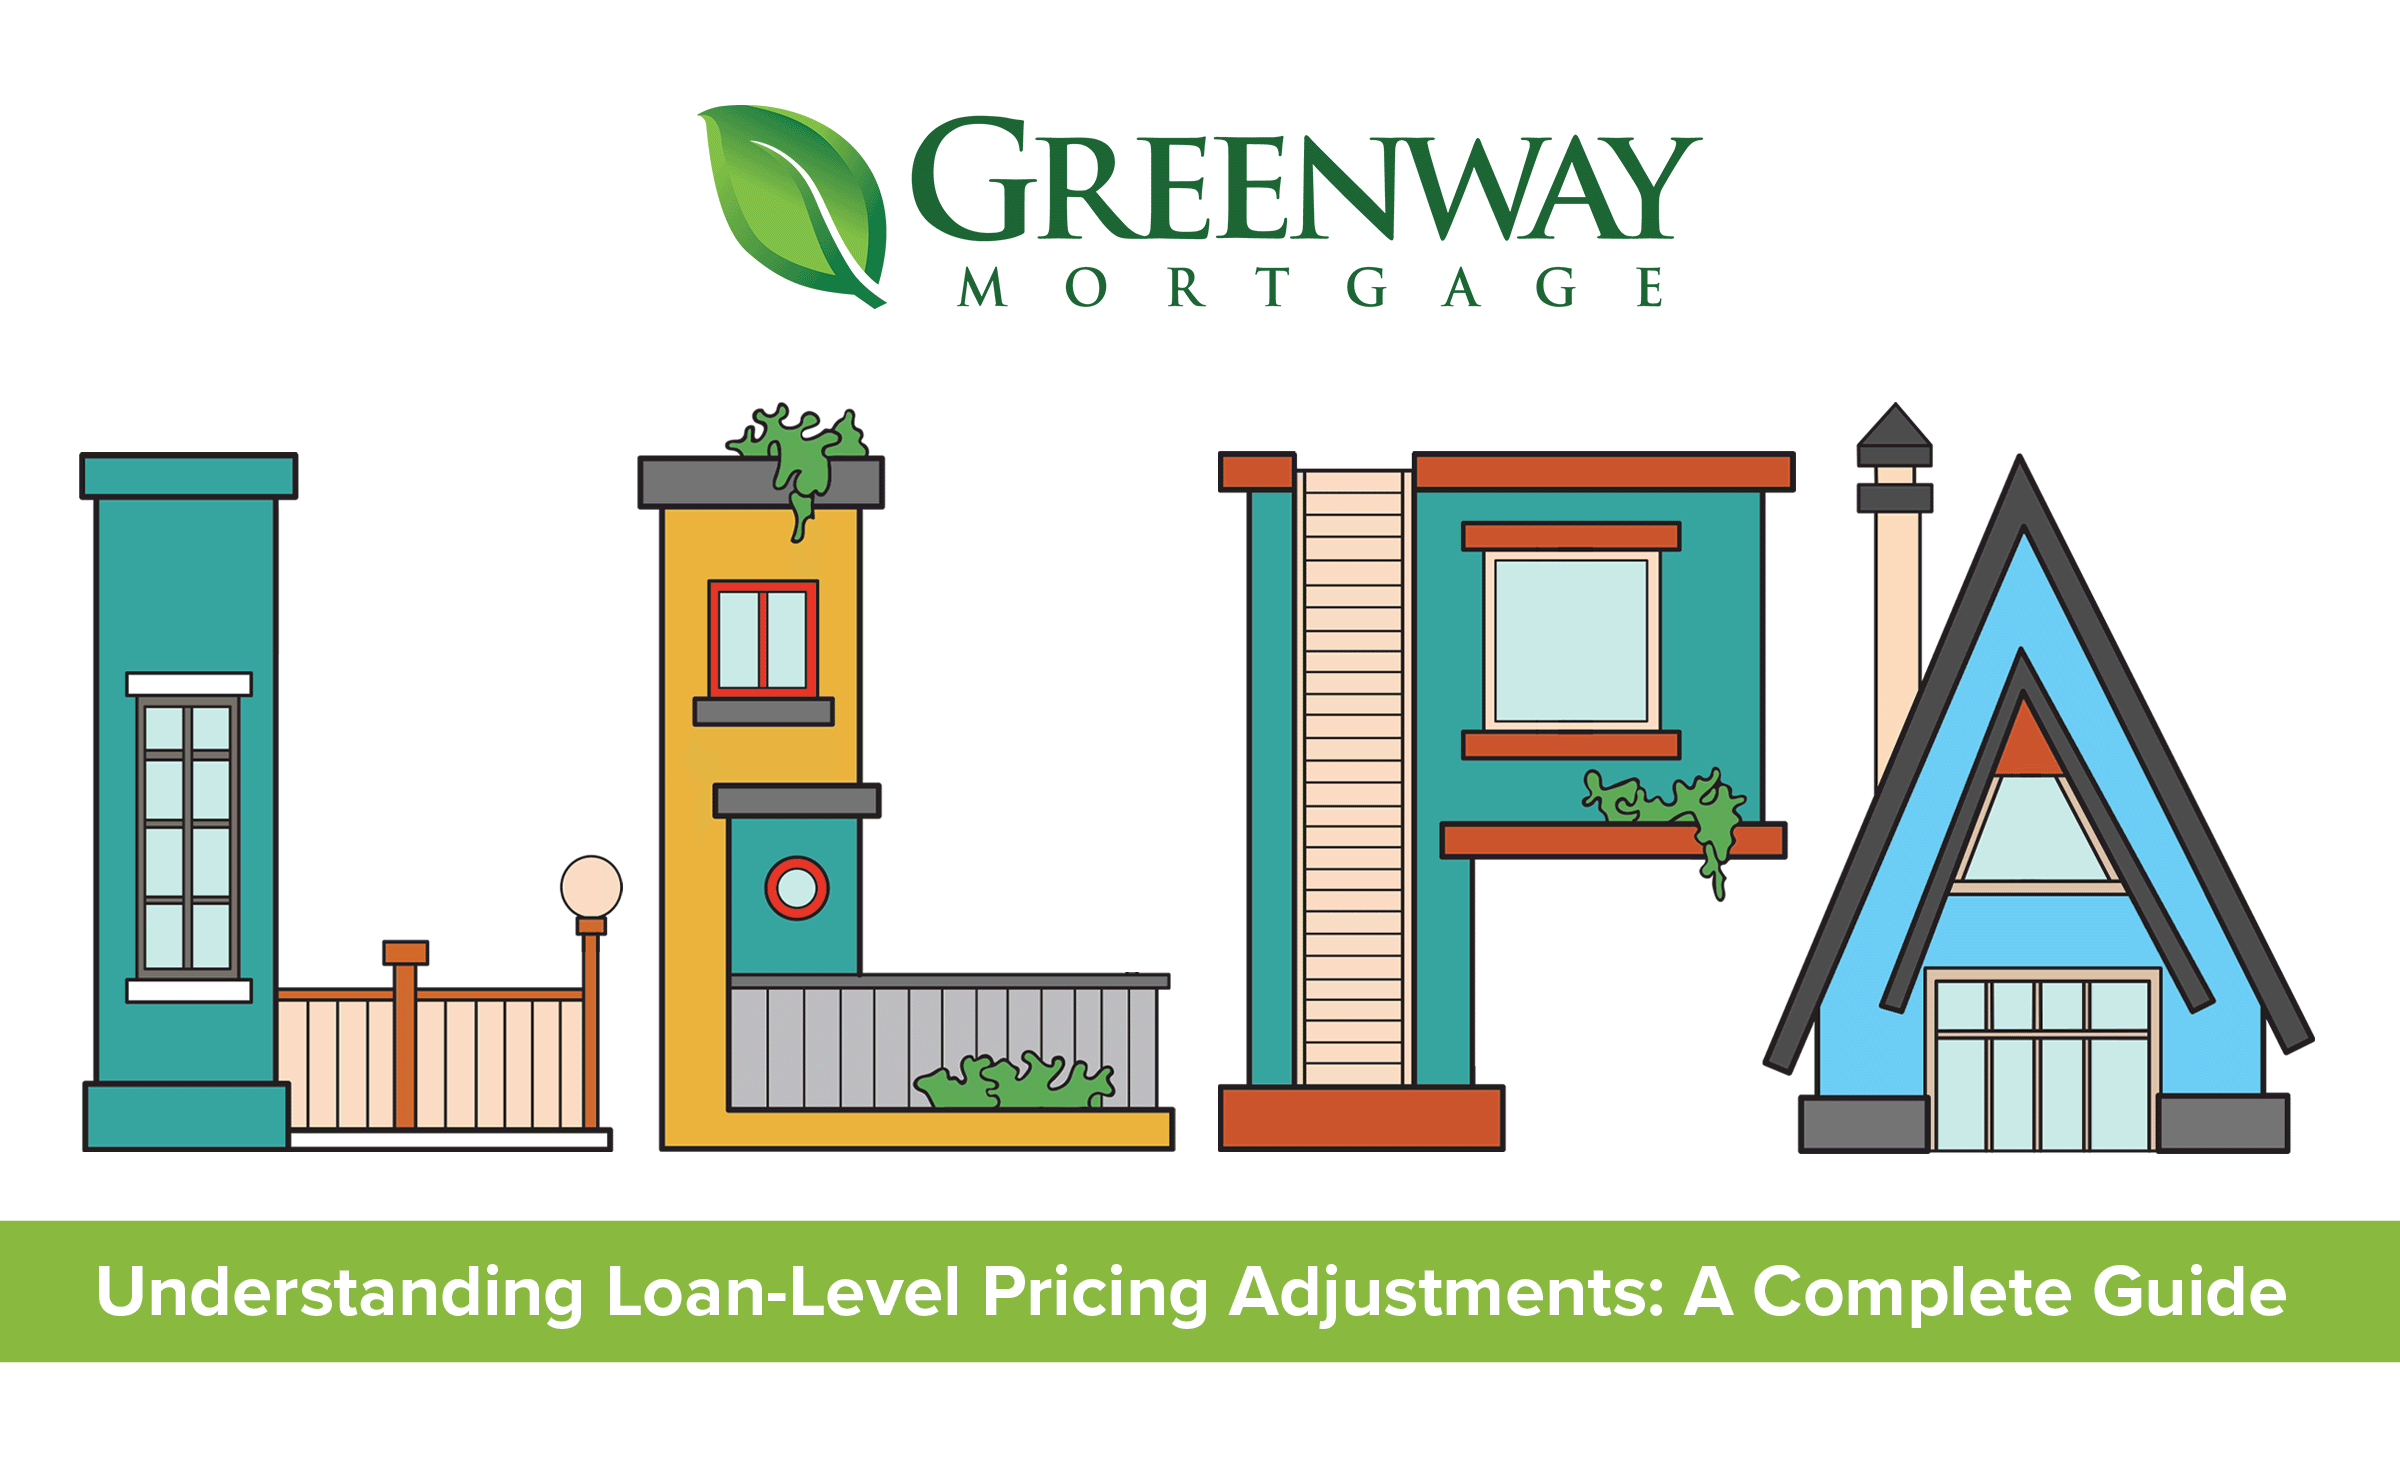 Understanding Loan-Level Pricing Adjustments (LLPA): A Complete Guide 